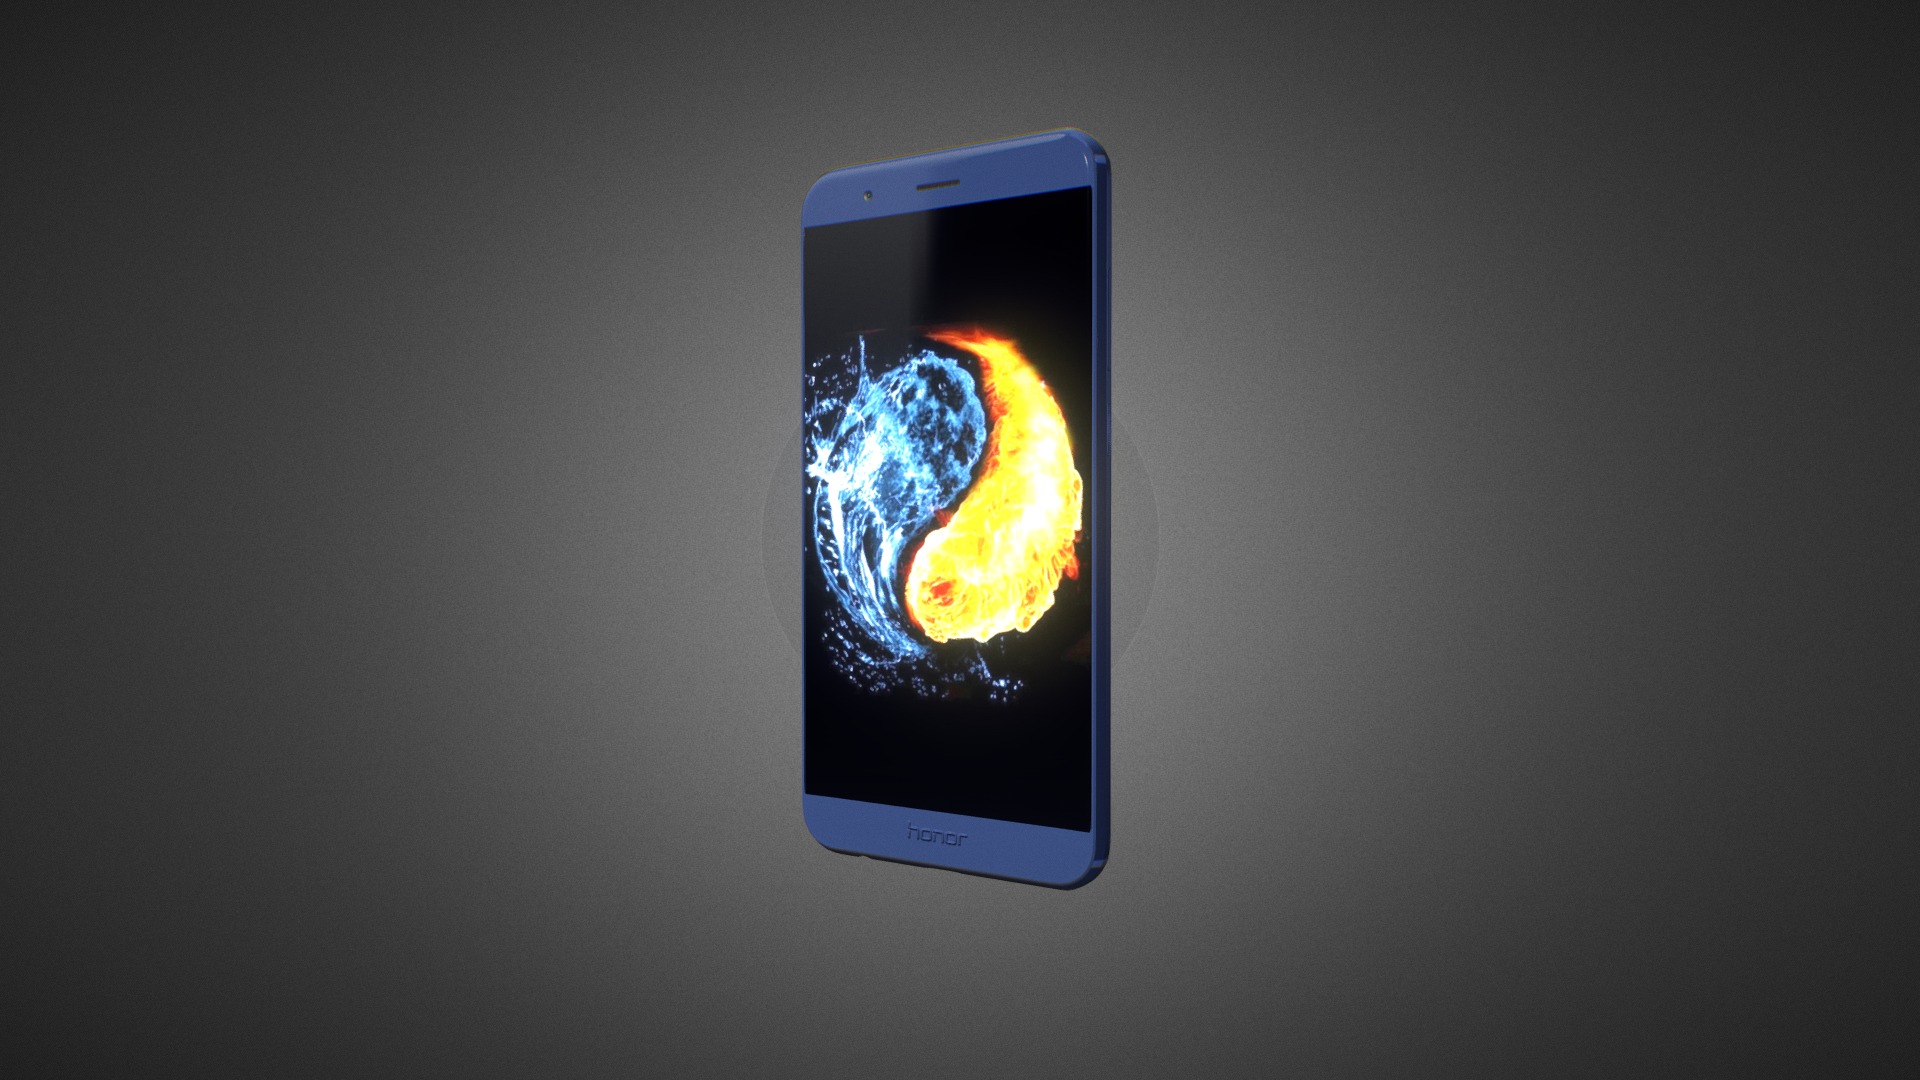 3D model Huawei Honor 8 Pro for Element 3D - This is a 3D model of the Huawei Honor 8 Pro for Element 3D. The 3D model is about a cell phone with a colorful image on the screen.